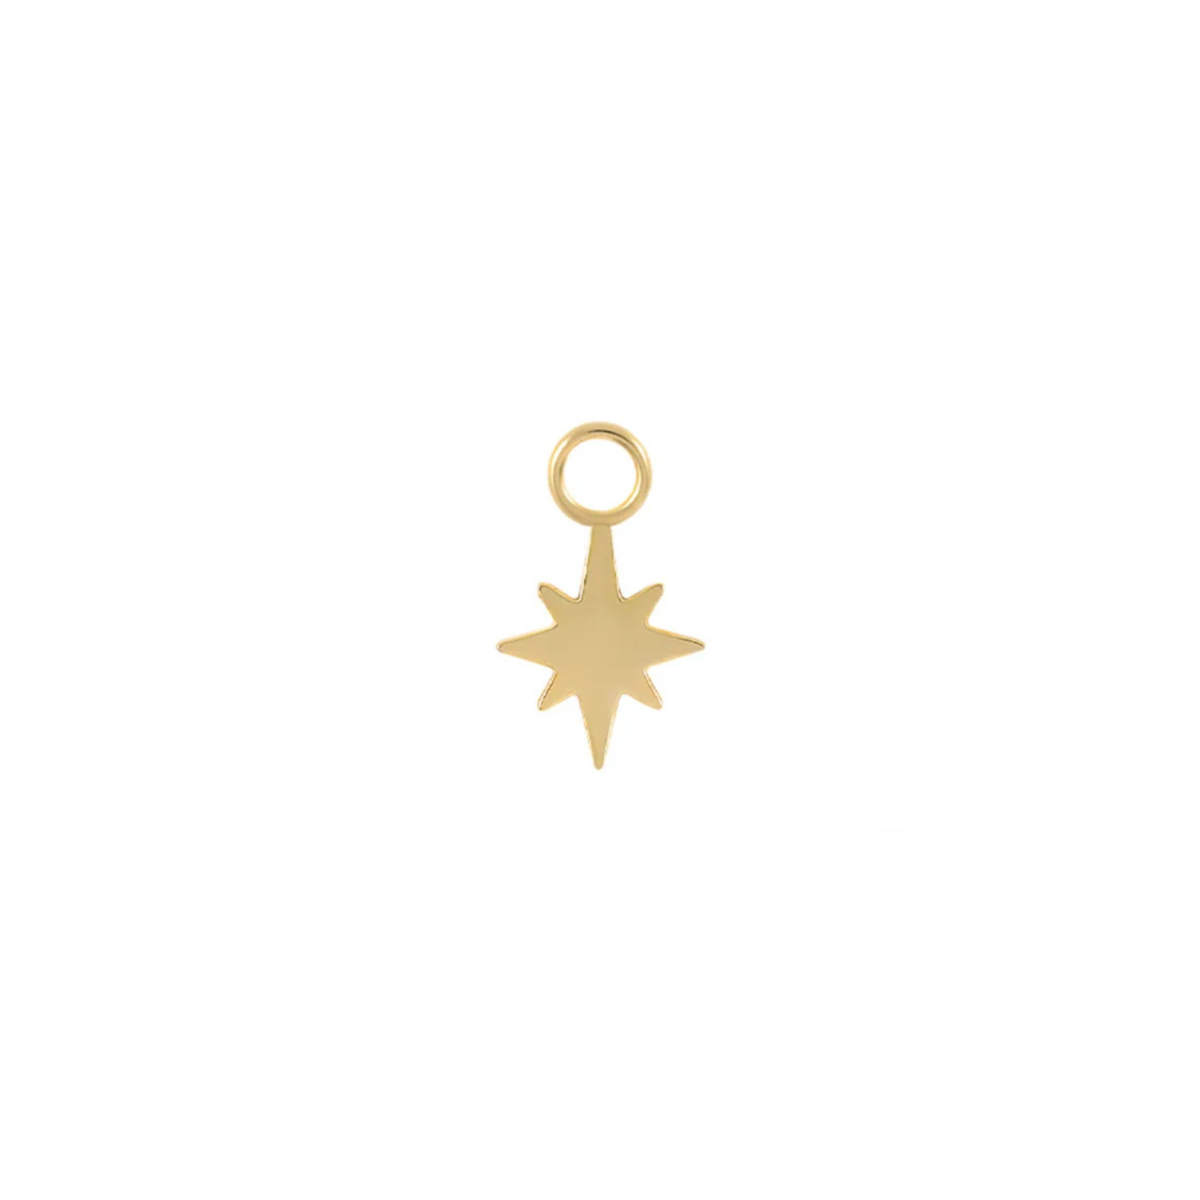 Astra- 18k Gold Plated Earring Charm